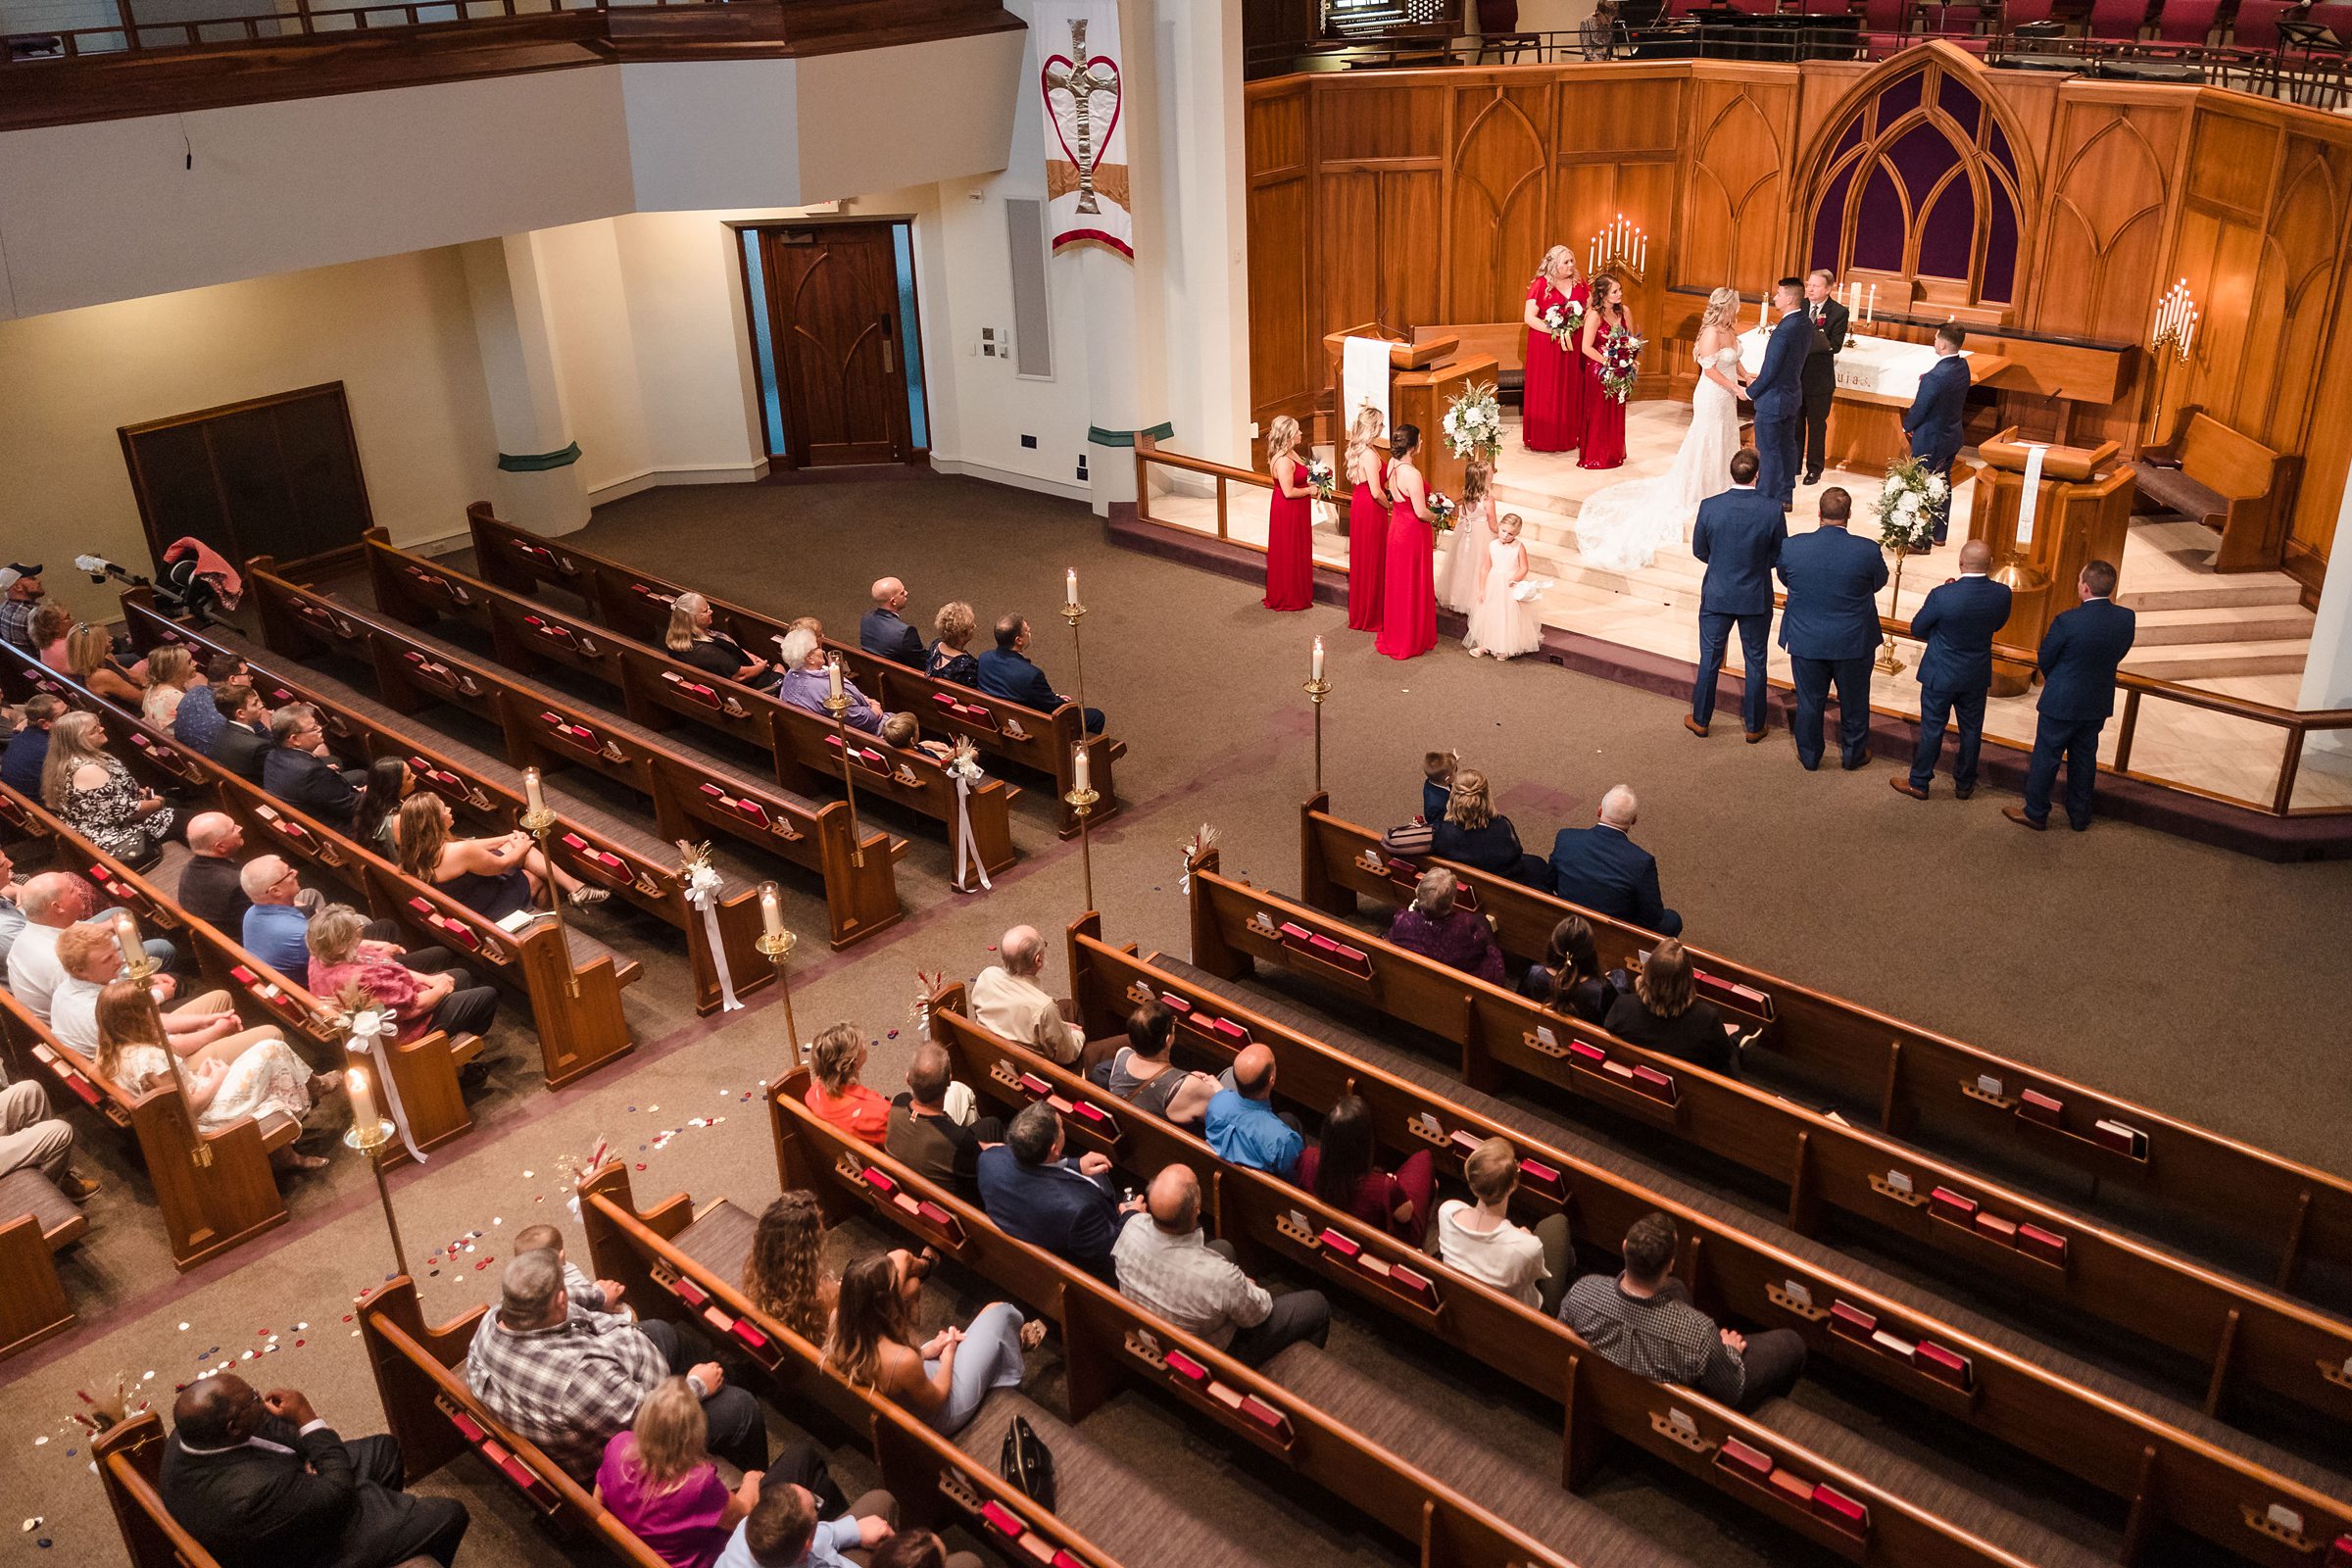 Wedding Ceremony at the First United Methodist Church in Peoria, Illinois